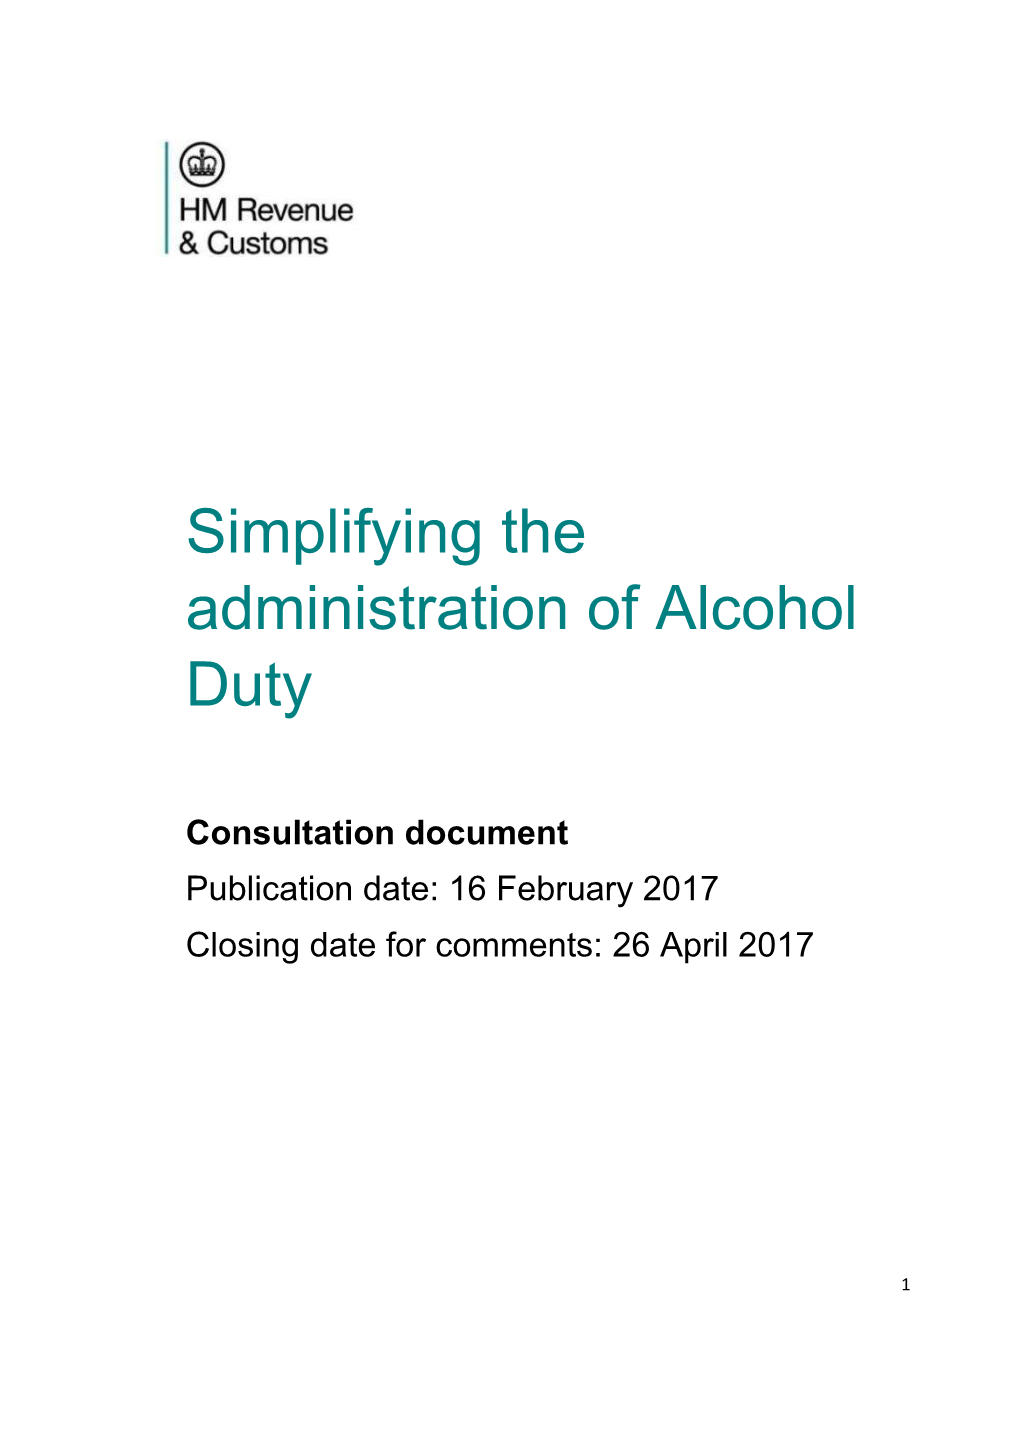 Simplifying the Administration of Alcohol Duty